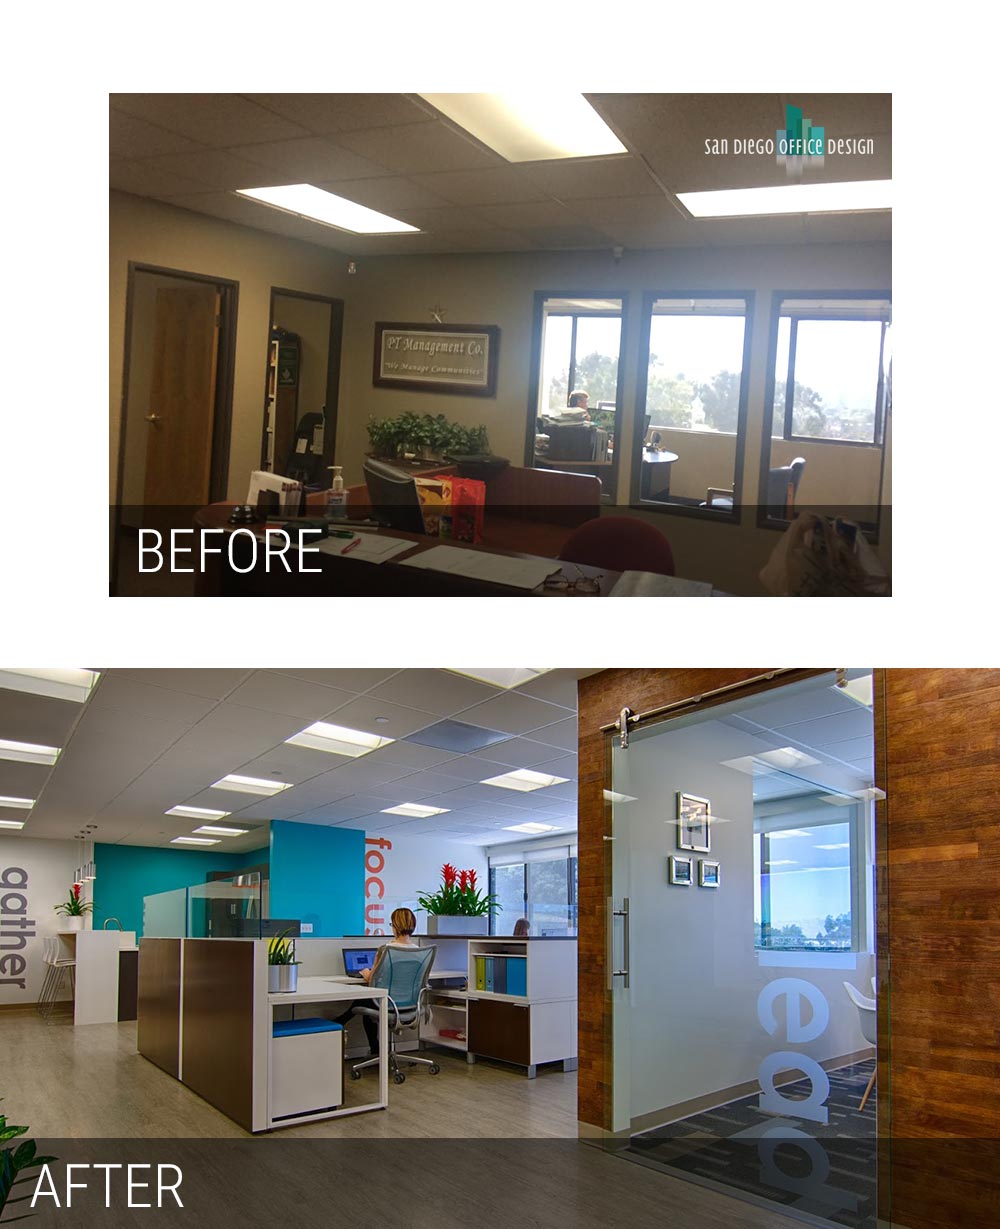 Before and After - San Diego Office Design